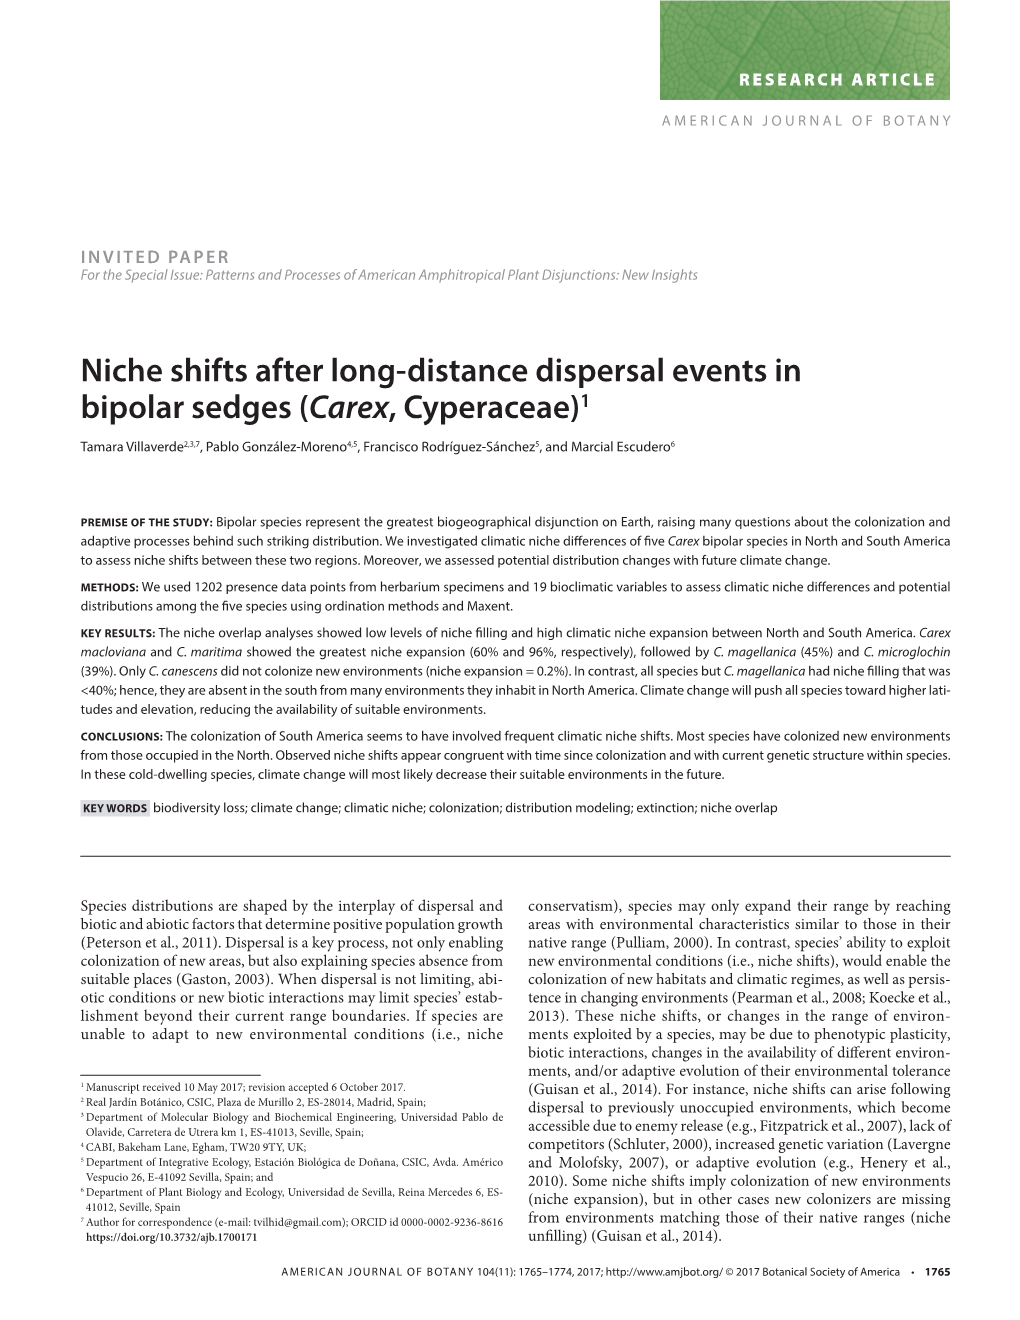 Niche Shifts After Long-Distance Dispersal Events in Bipolar Sedges (Carex , Cyperaceae)1